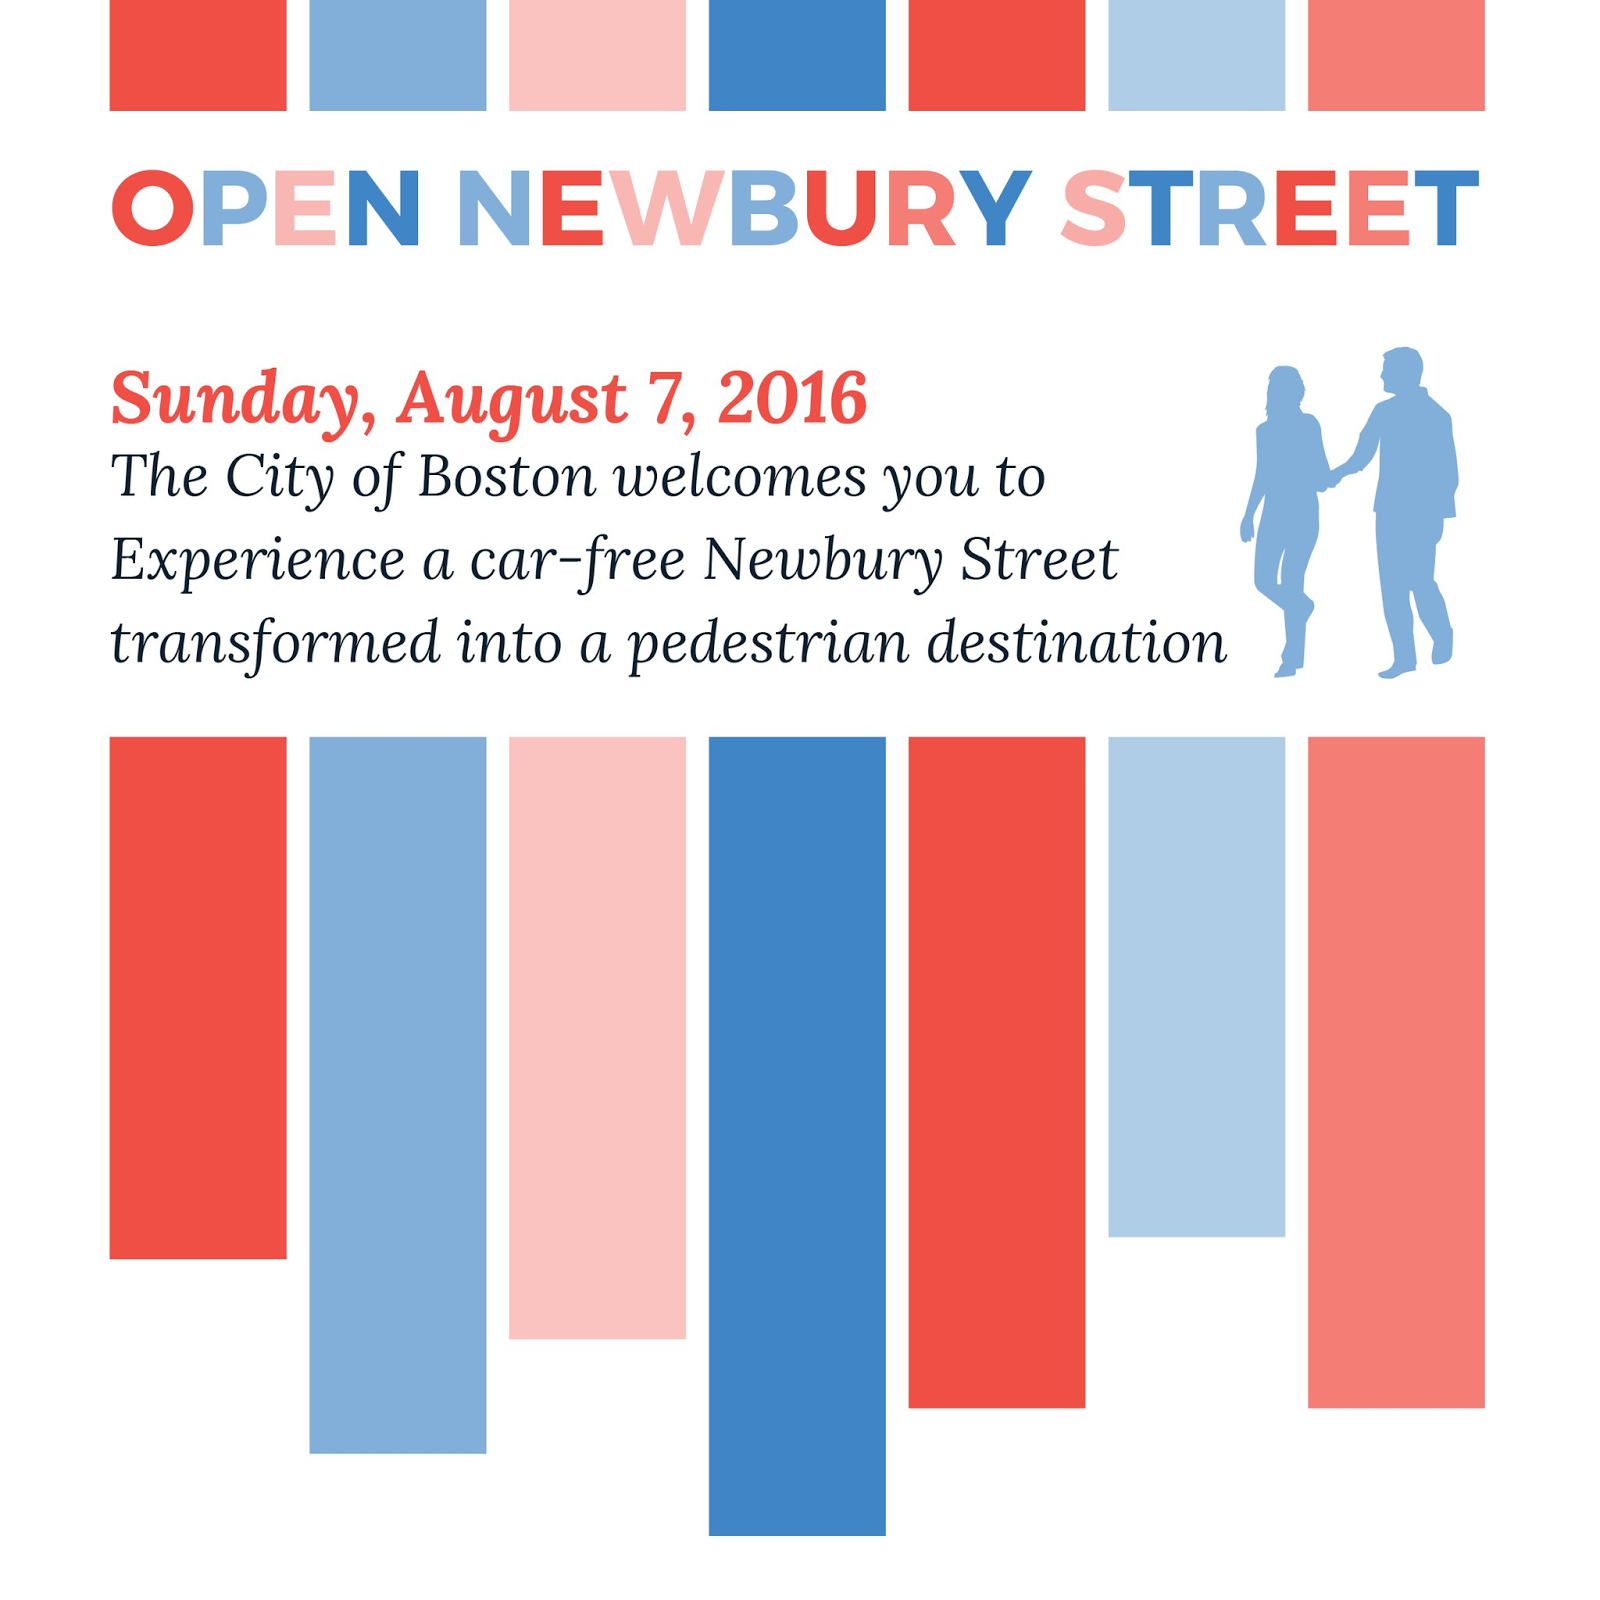 2017 'Open Newbury Street' series to take place again this summer